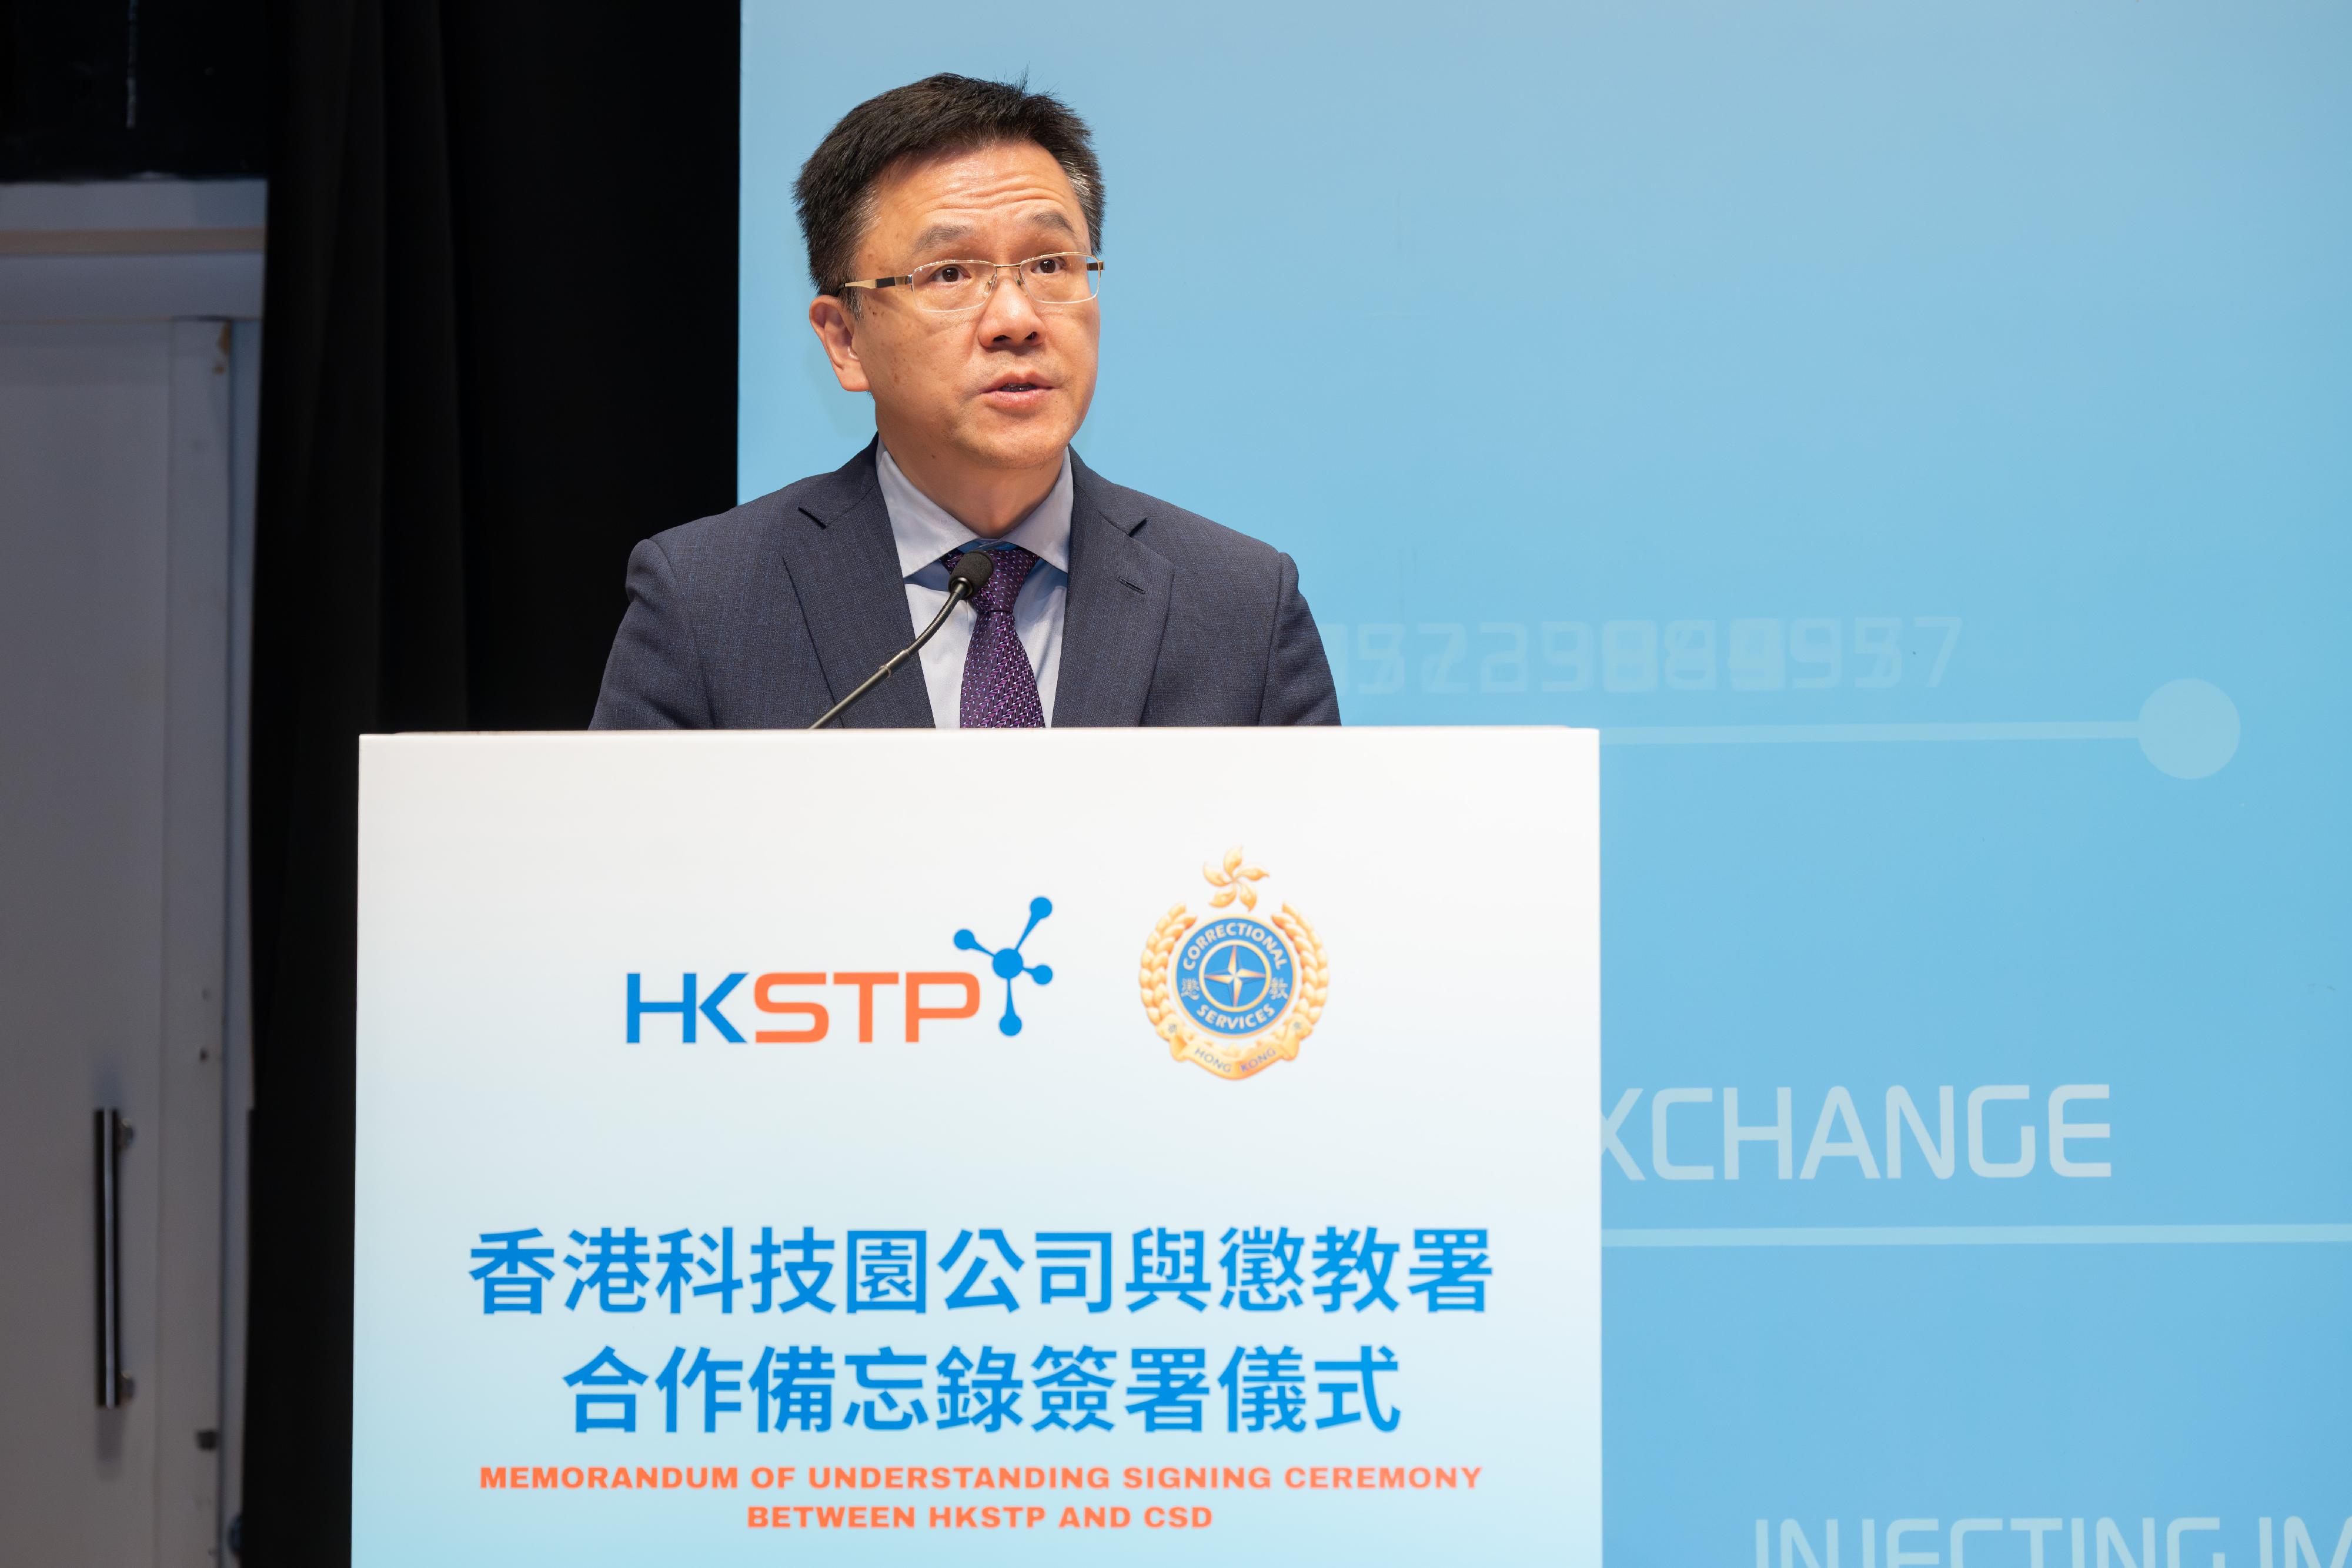 The Correctional Services Department and the Hong Kong Science and Technology Parks Corporation signed a Memorandum of Understanding today (July 11) to deepen their co-operation, which will inject new impetus into the sustainable development of "Smart Prison". Photo shows the Secretary for Innovation, Technology and Industry, Professor Sun Dong, delivering a speech at the signing ceremony.